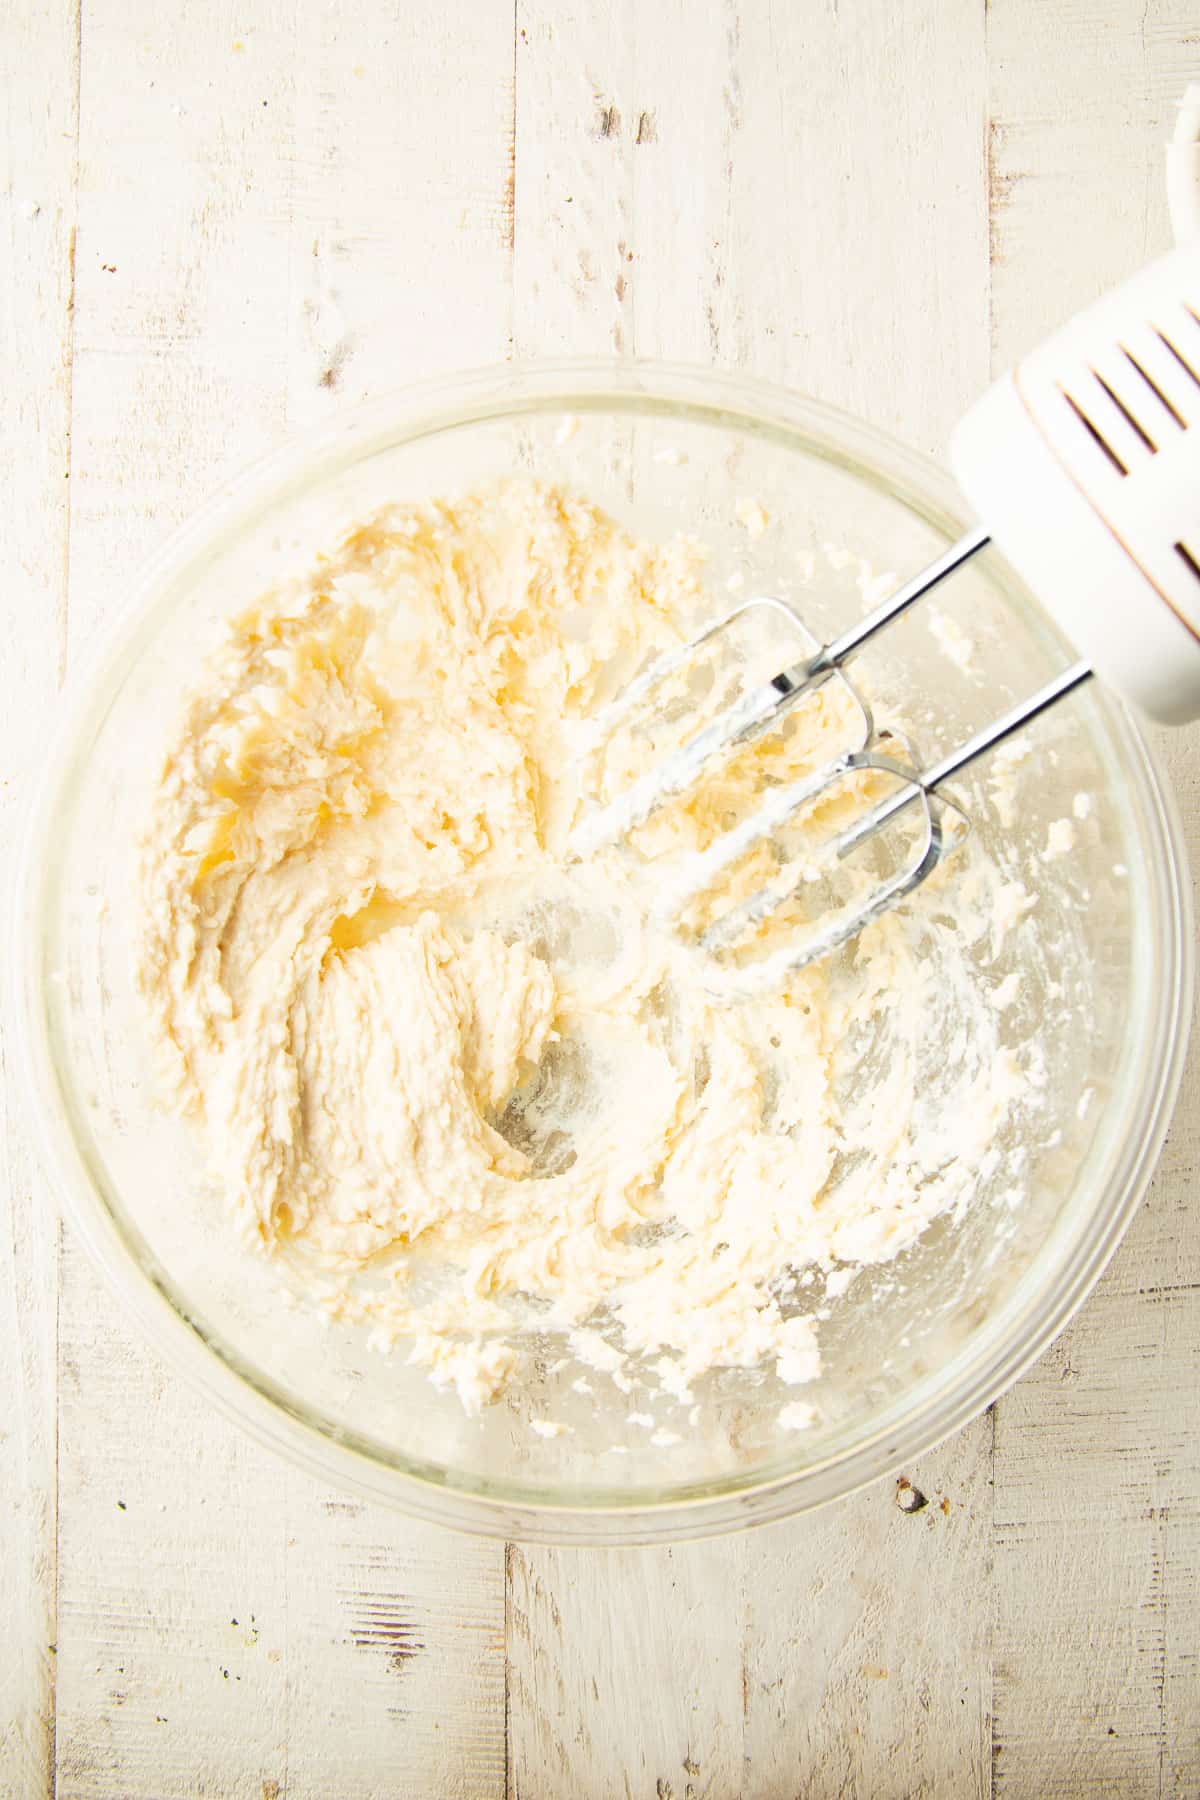 Creamed mixture of vegan butter, cream cheese, and vanilla extract in a mixing bowl with electric mixer.